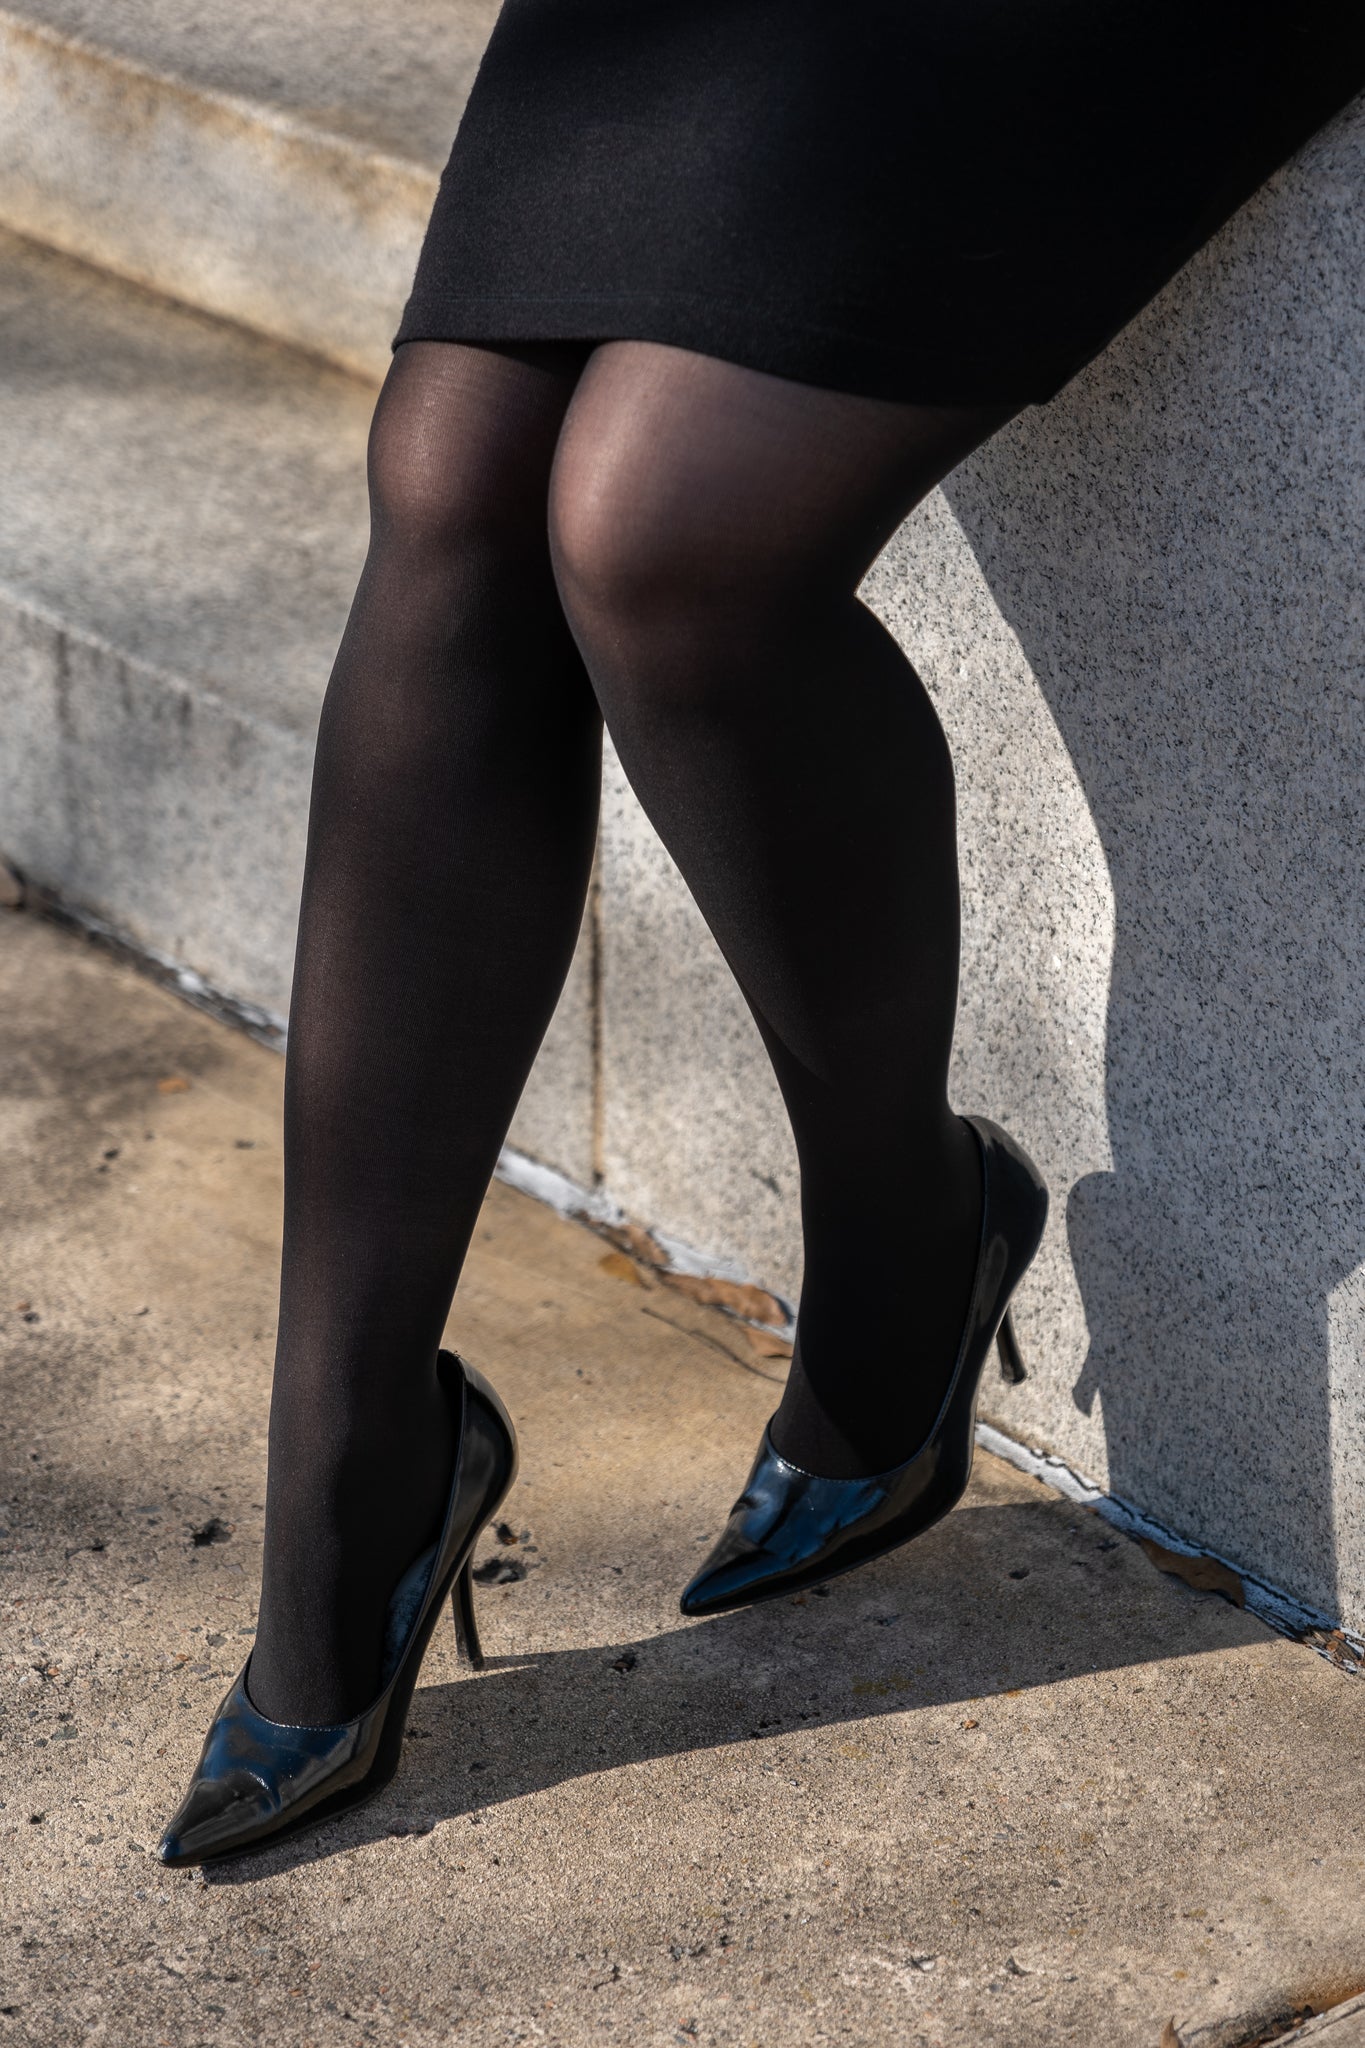 Black Semi-Opaque Tights With Luxe Comfort Waistband